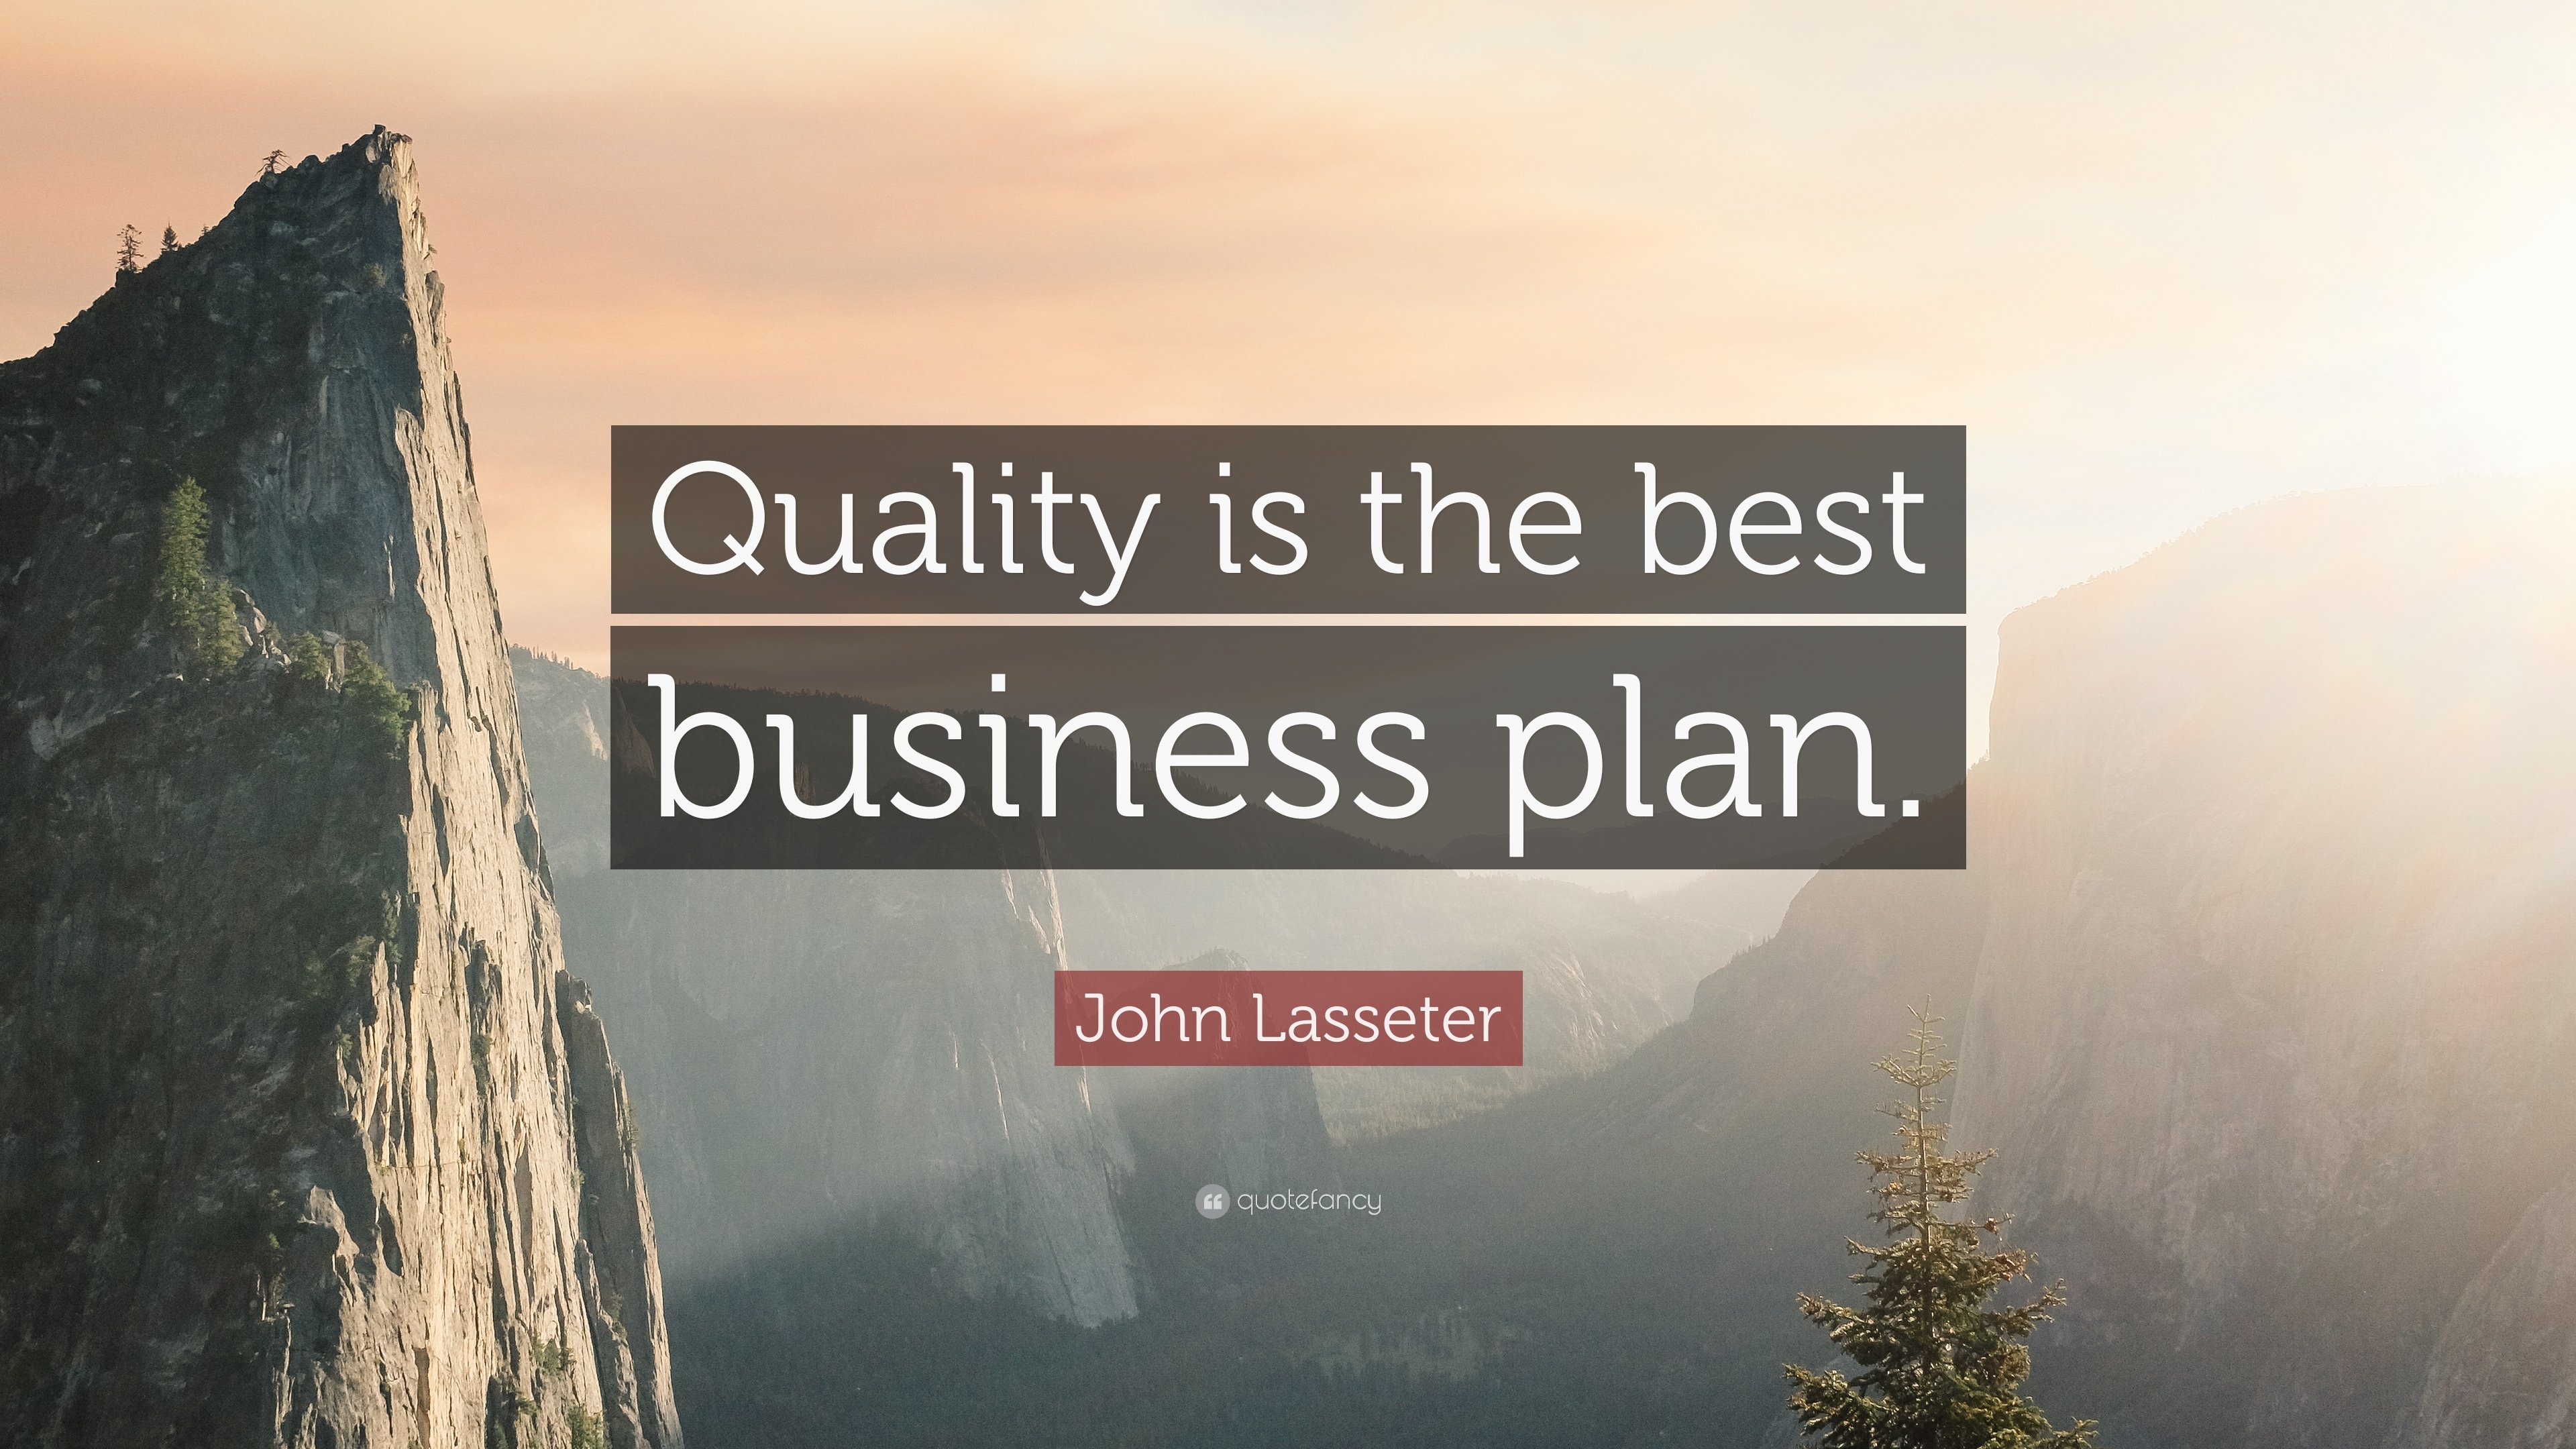 John Lasseter Quote: “Quality is the best business plan